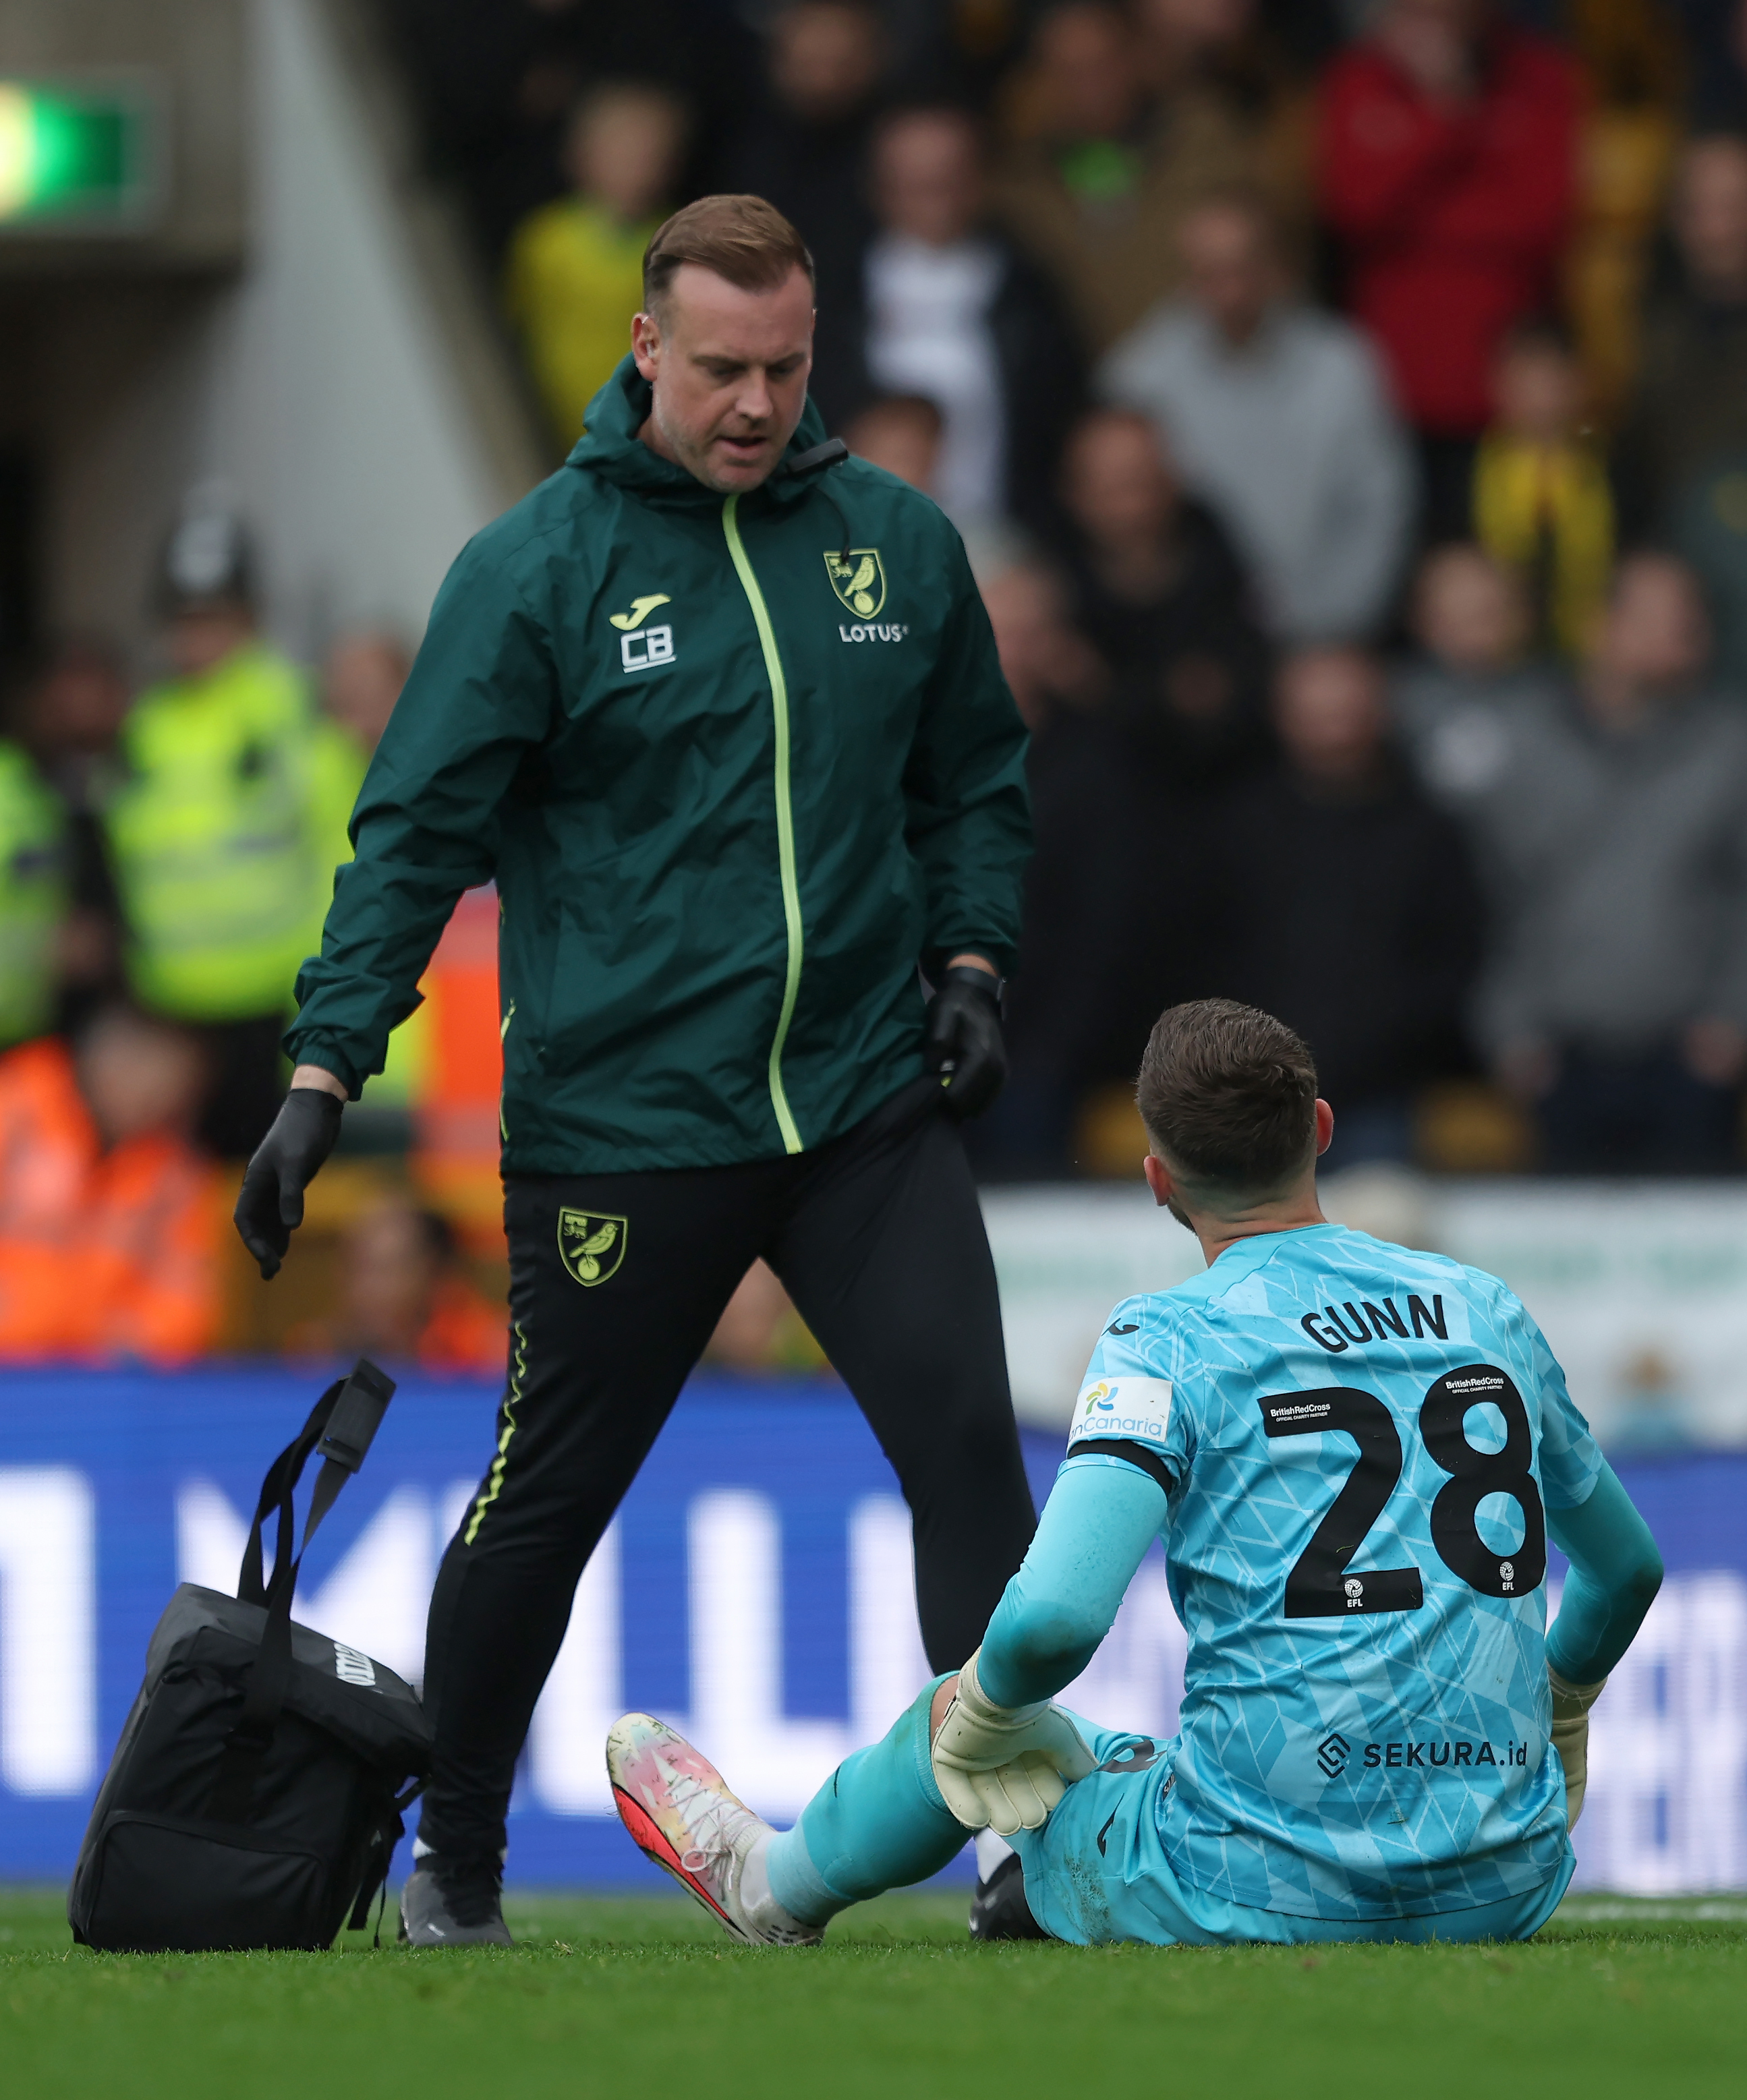 Goalkeeper Angus Gunn picked up an injury playing for Norwich against Leeds